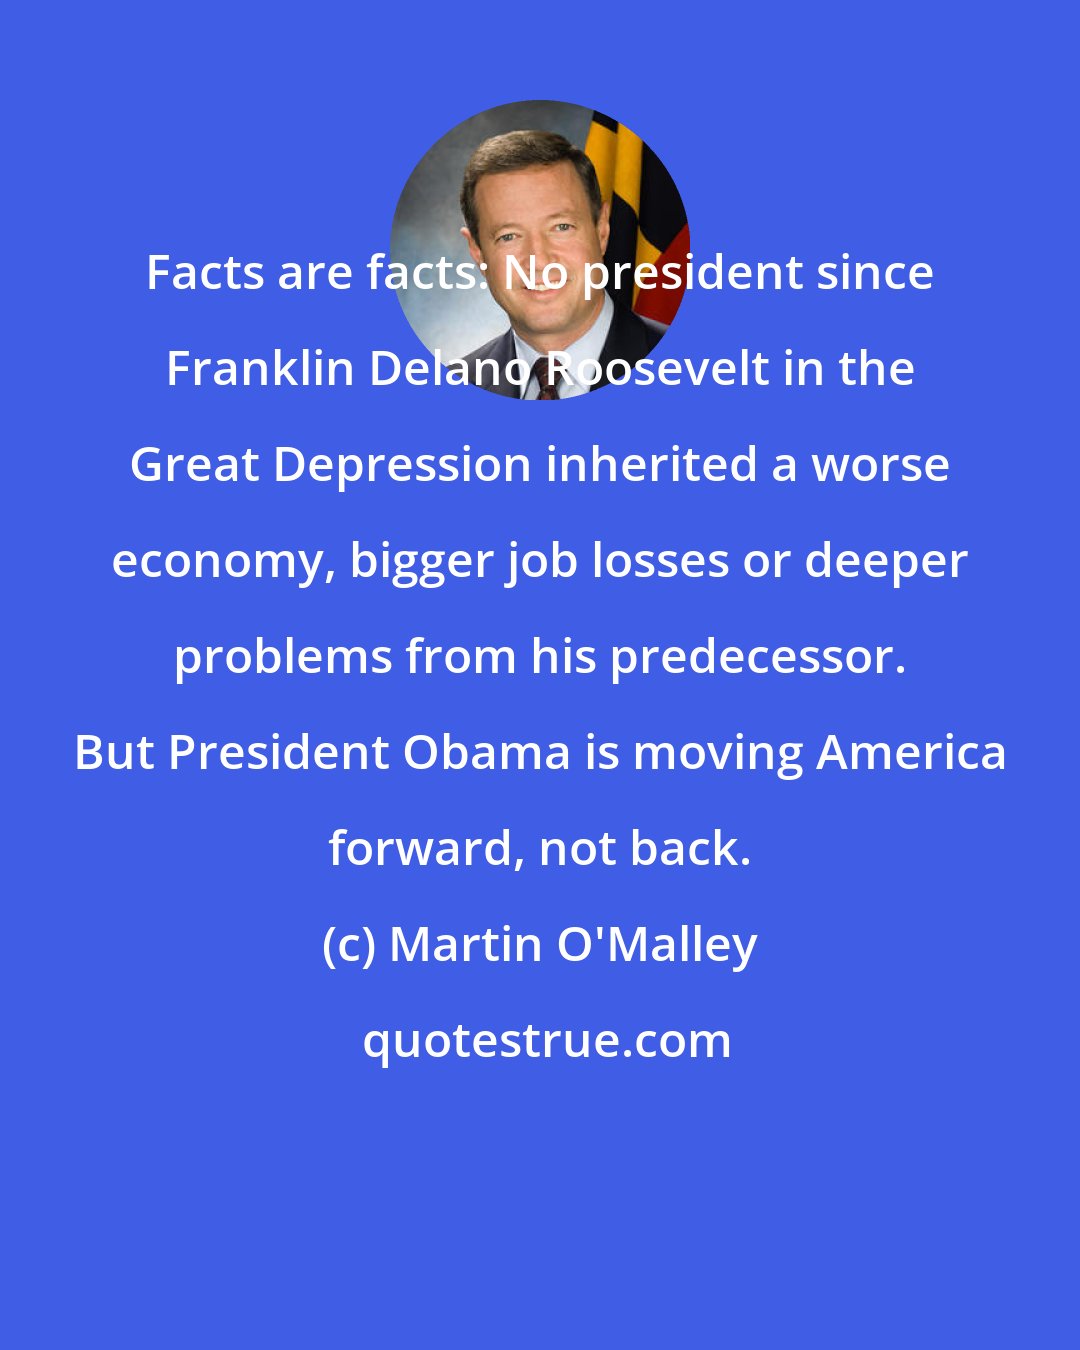 Martin O'Malley: Facts are facts: No president since Franklin Delano Roosevelt in the Great Depression inherited a worse economy, bigger job losses or deeper problems from his predecessor. But President Obama is moving America forward, not back.